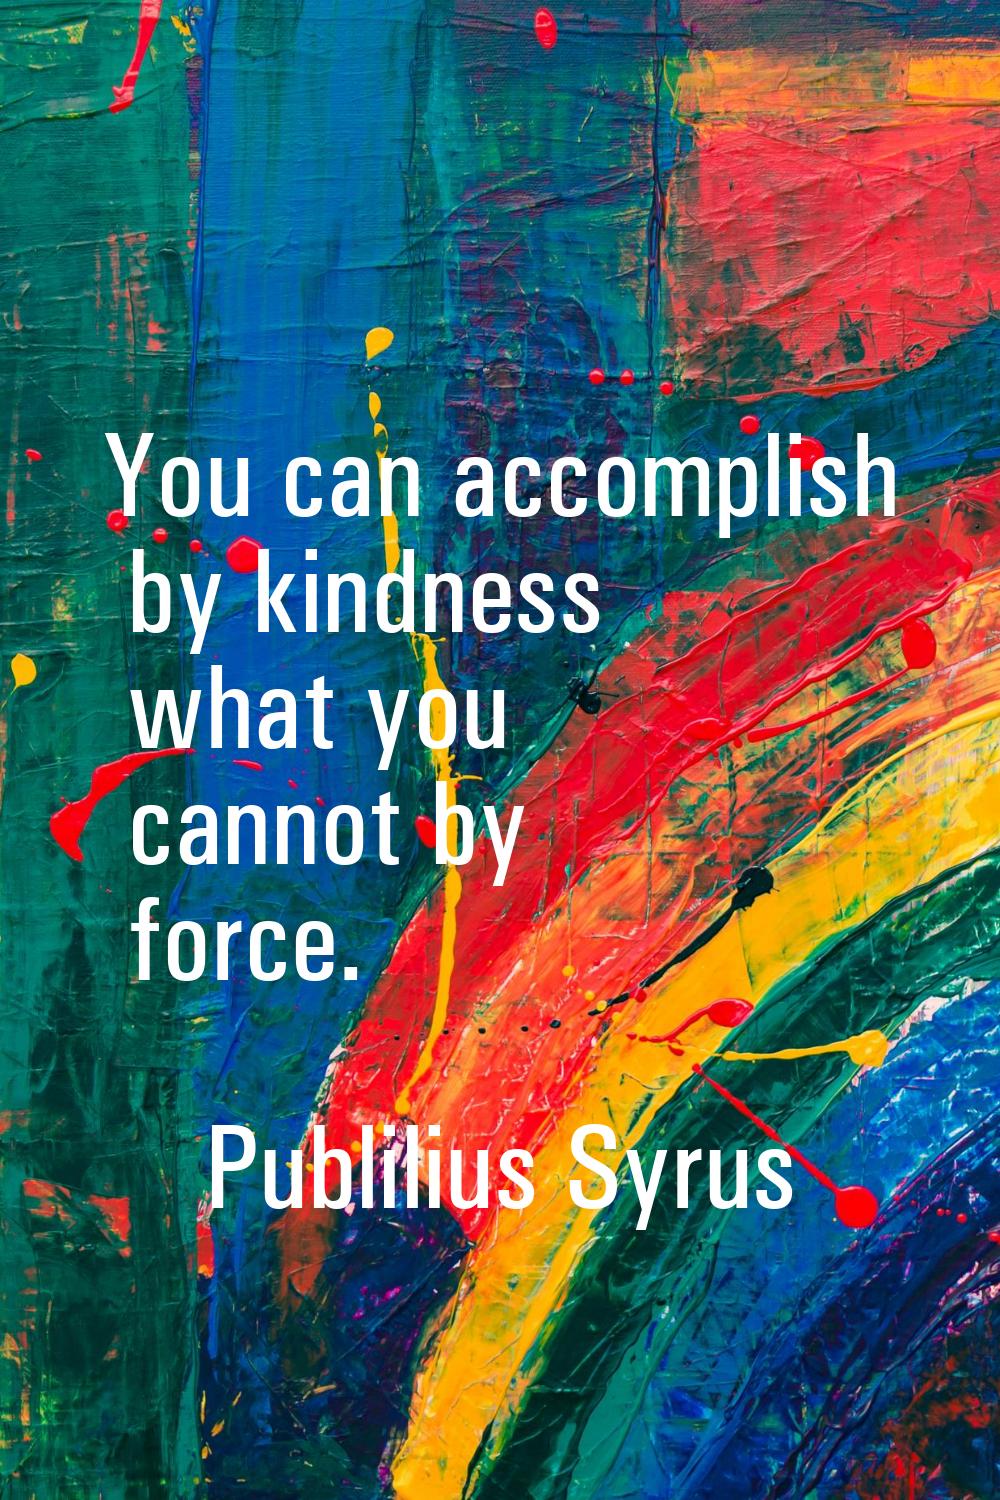 You can accomplish by kindness what you cannot by force.